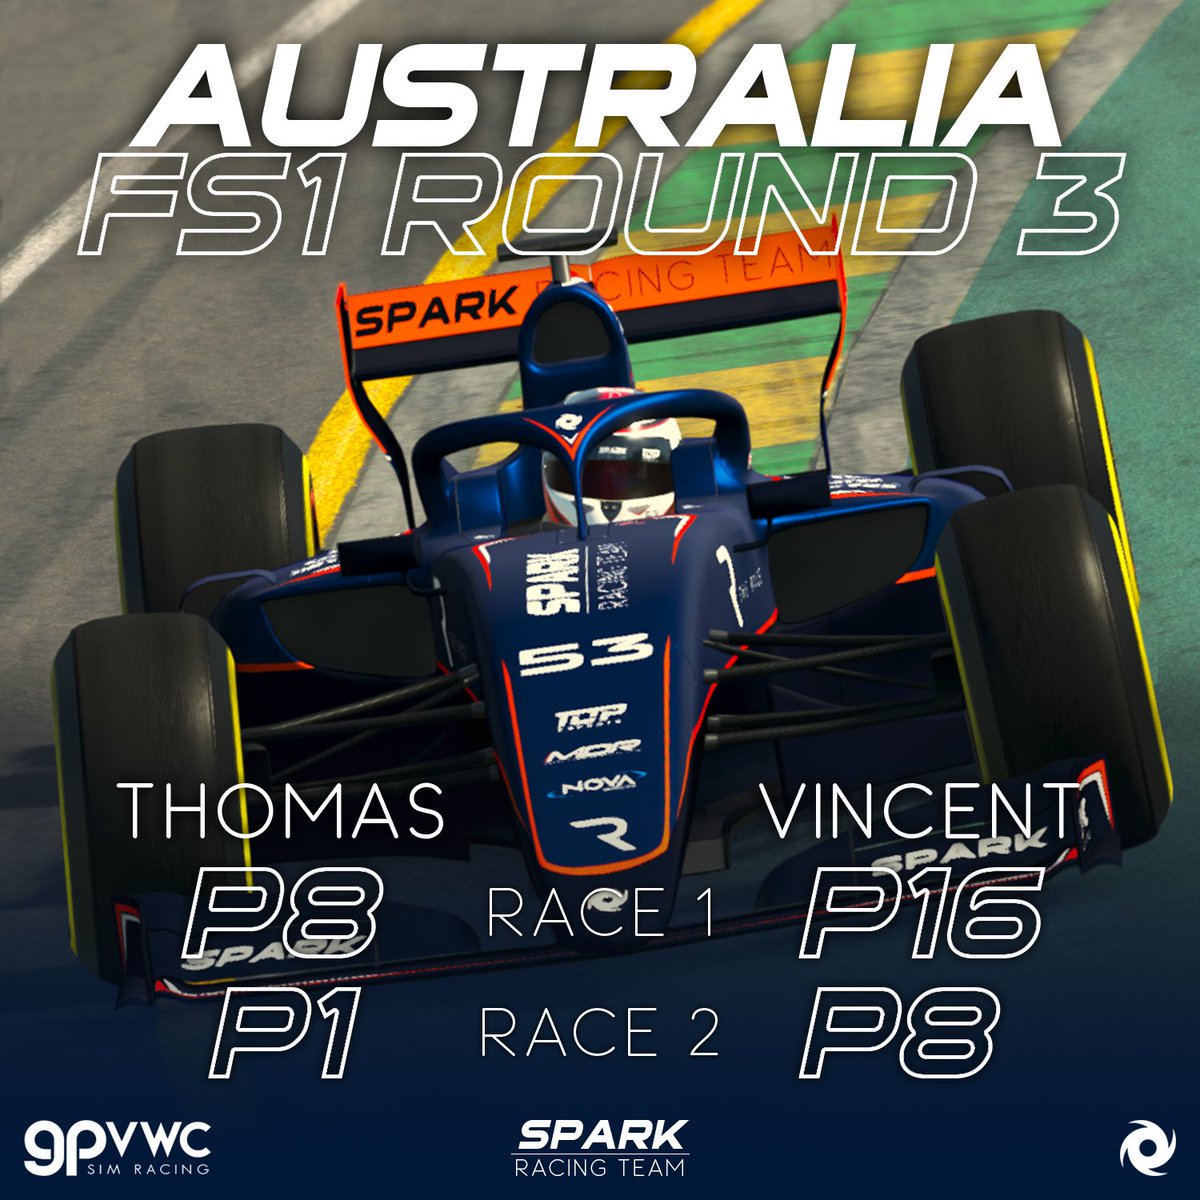 We take our first win in FS1! Thank you Tom, love you! #gpvwc #FS1 #simracing #esports #AustralianGP #AusGP